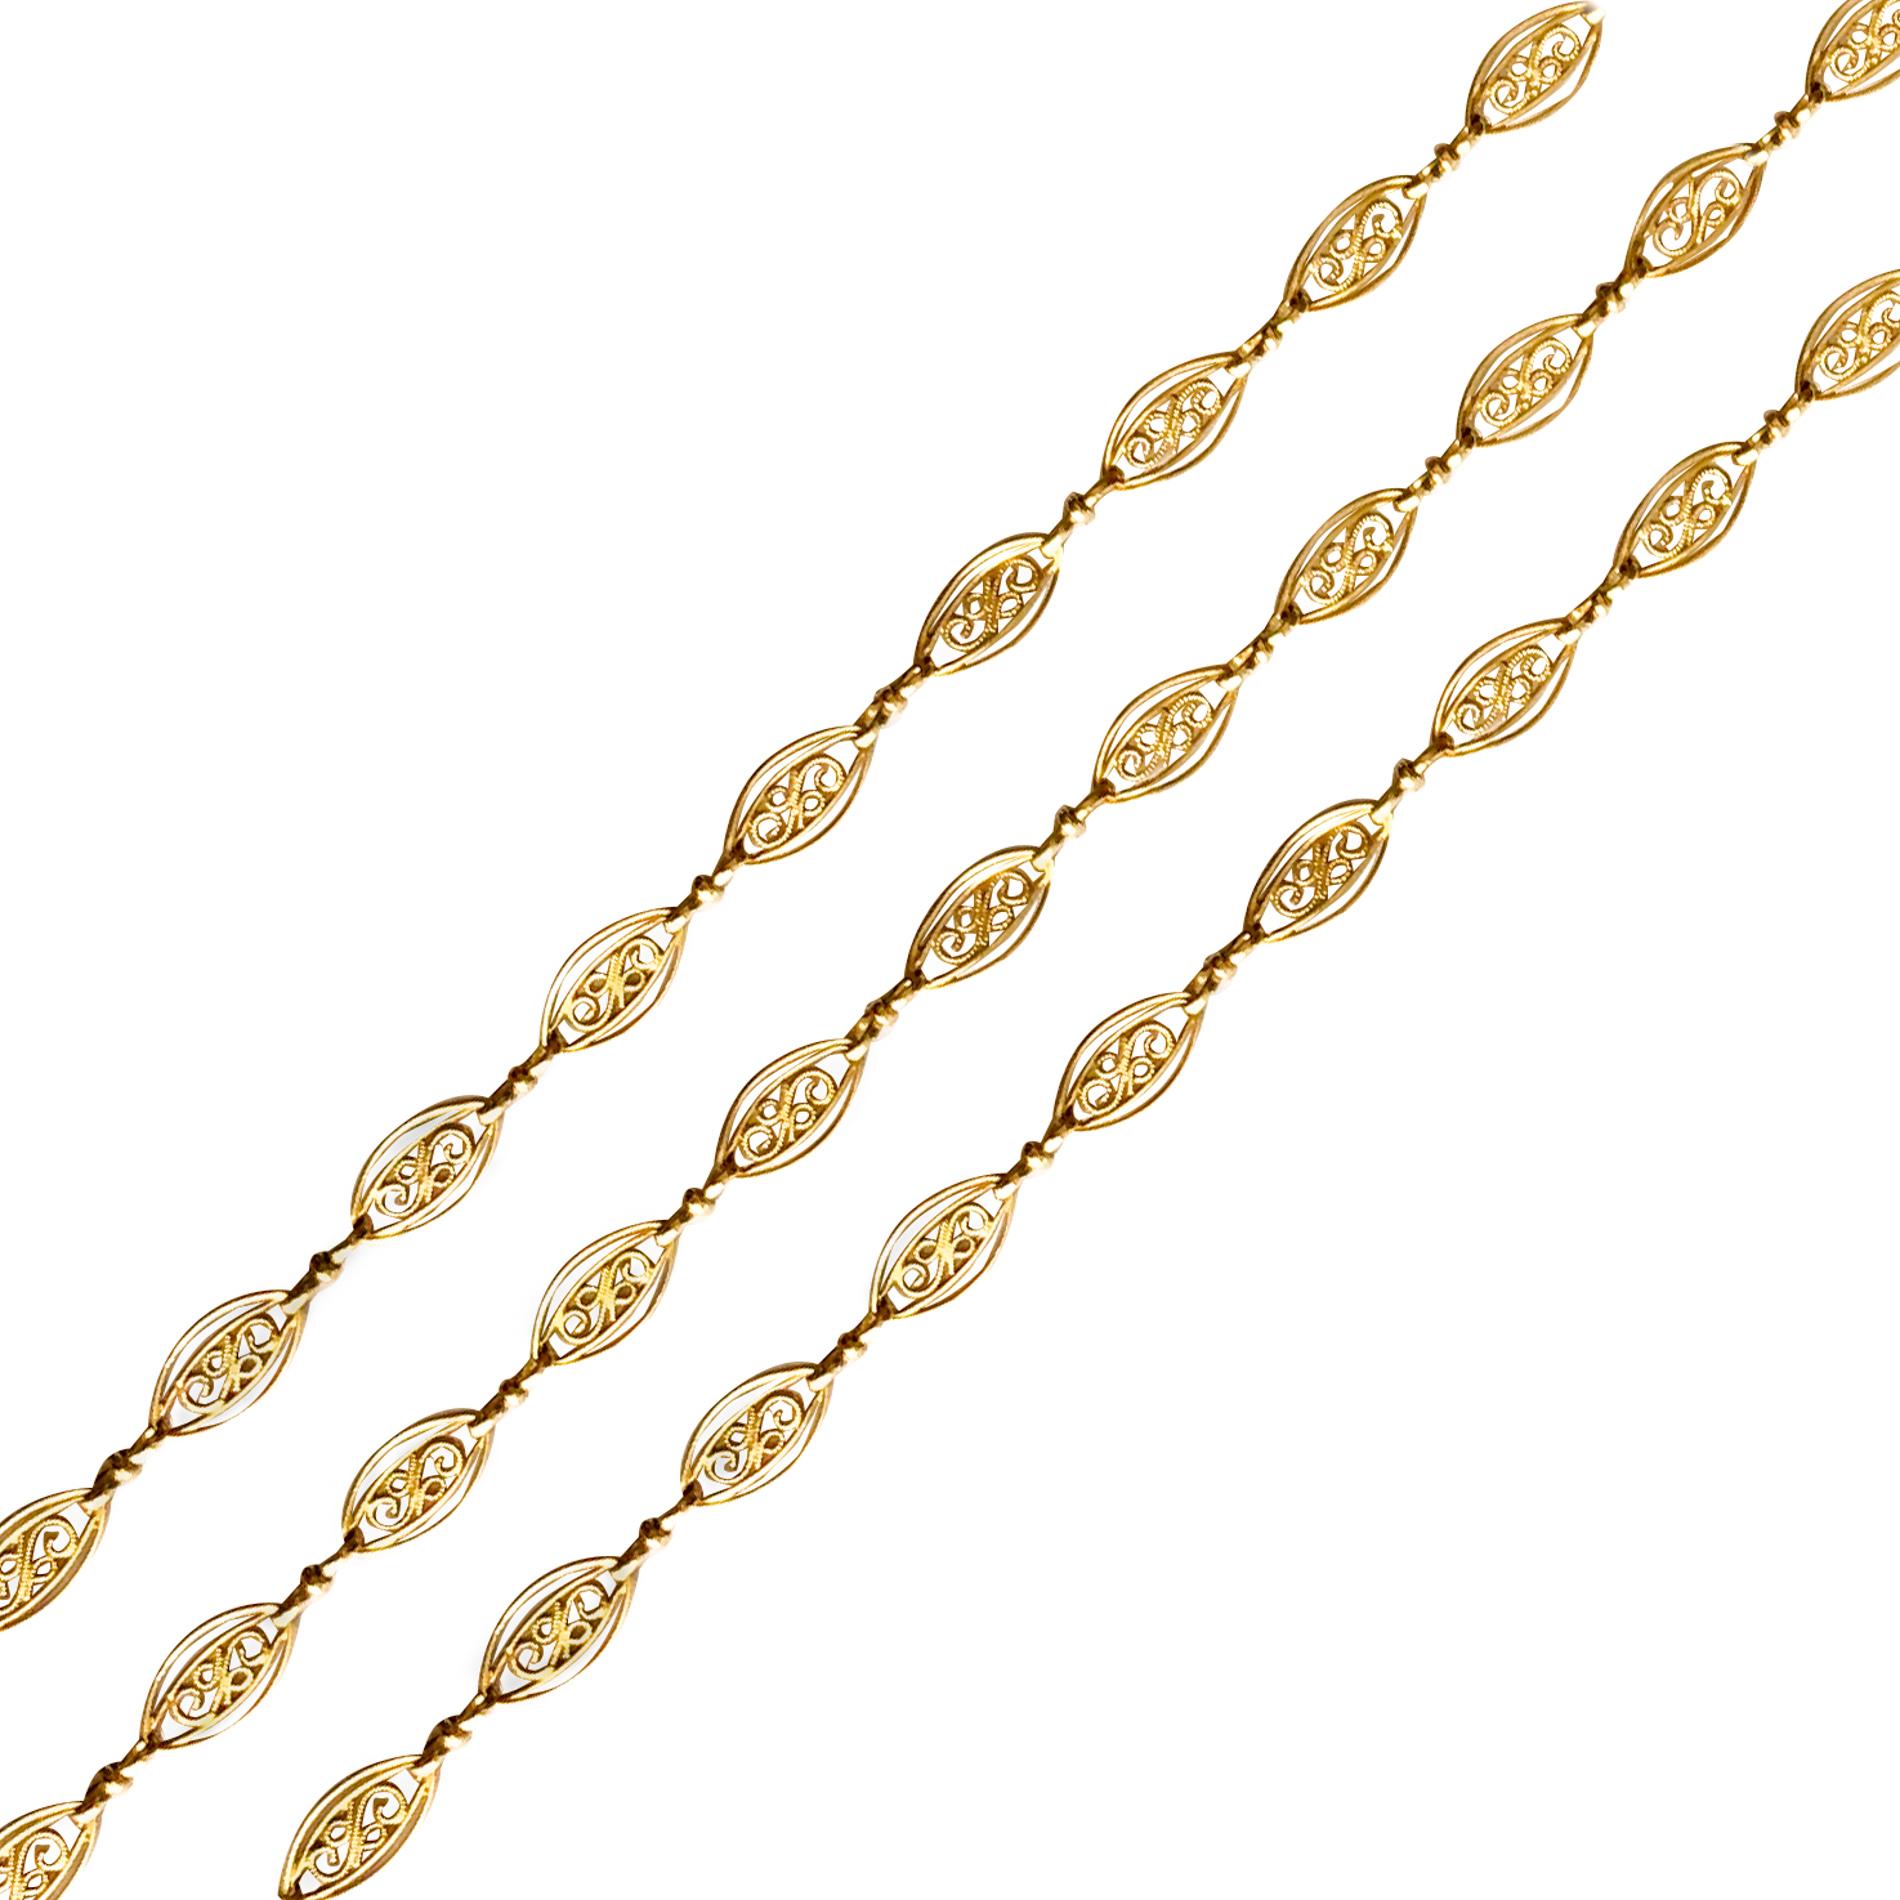 Long necklace in 18 karat yellow gold, eagle's head and rhinoceros head hallmarks.
This antique long necklace is made of filigree openwork shuttle-shaped links, held together by small knots. The hanging system is a spring ring.
Length: 102 cm,